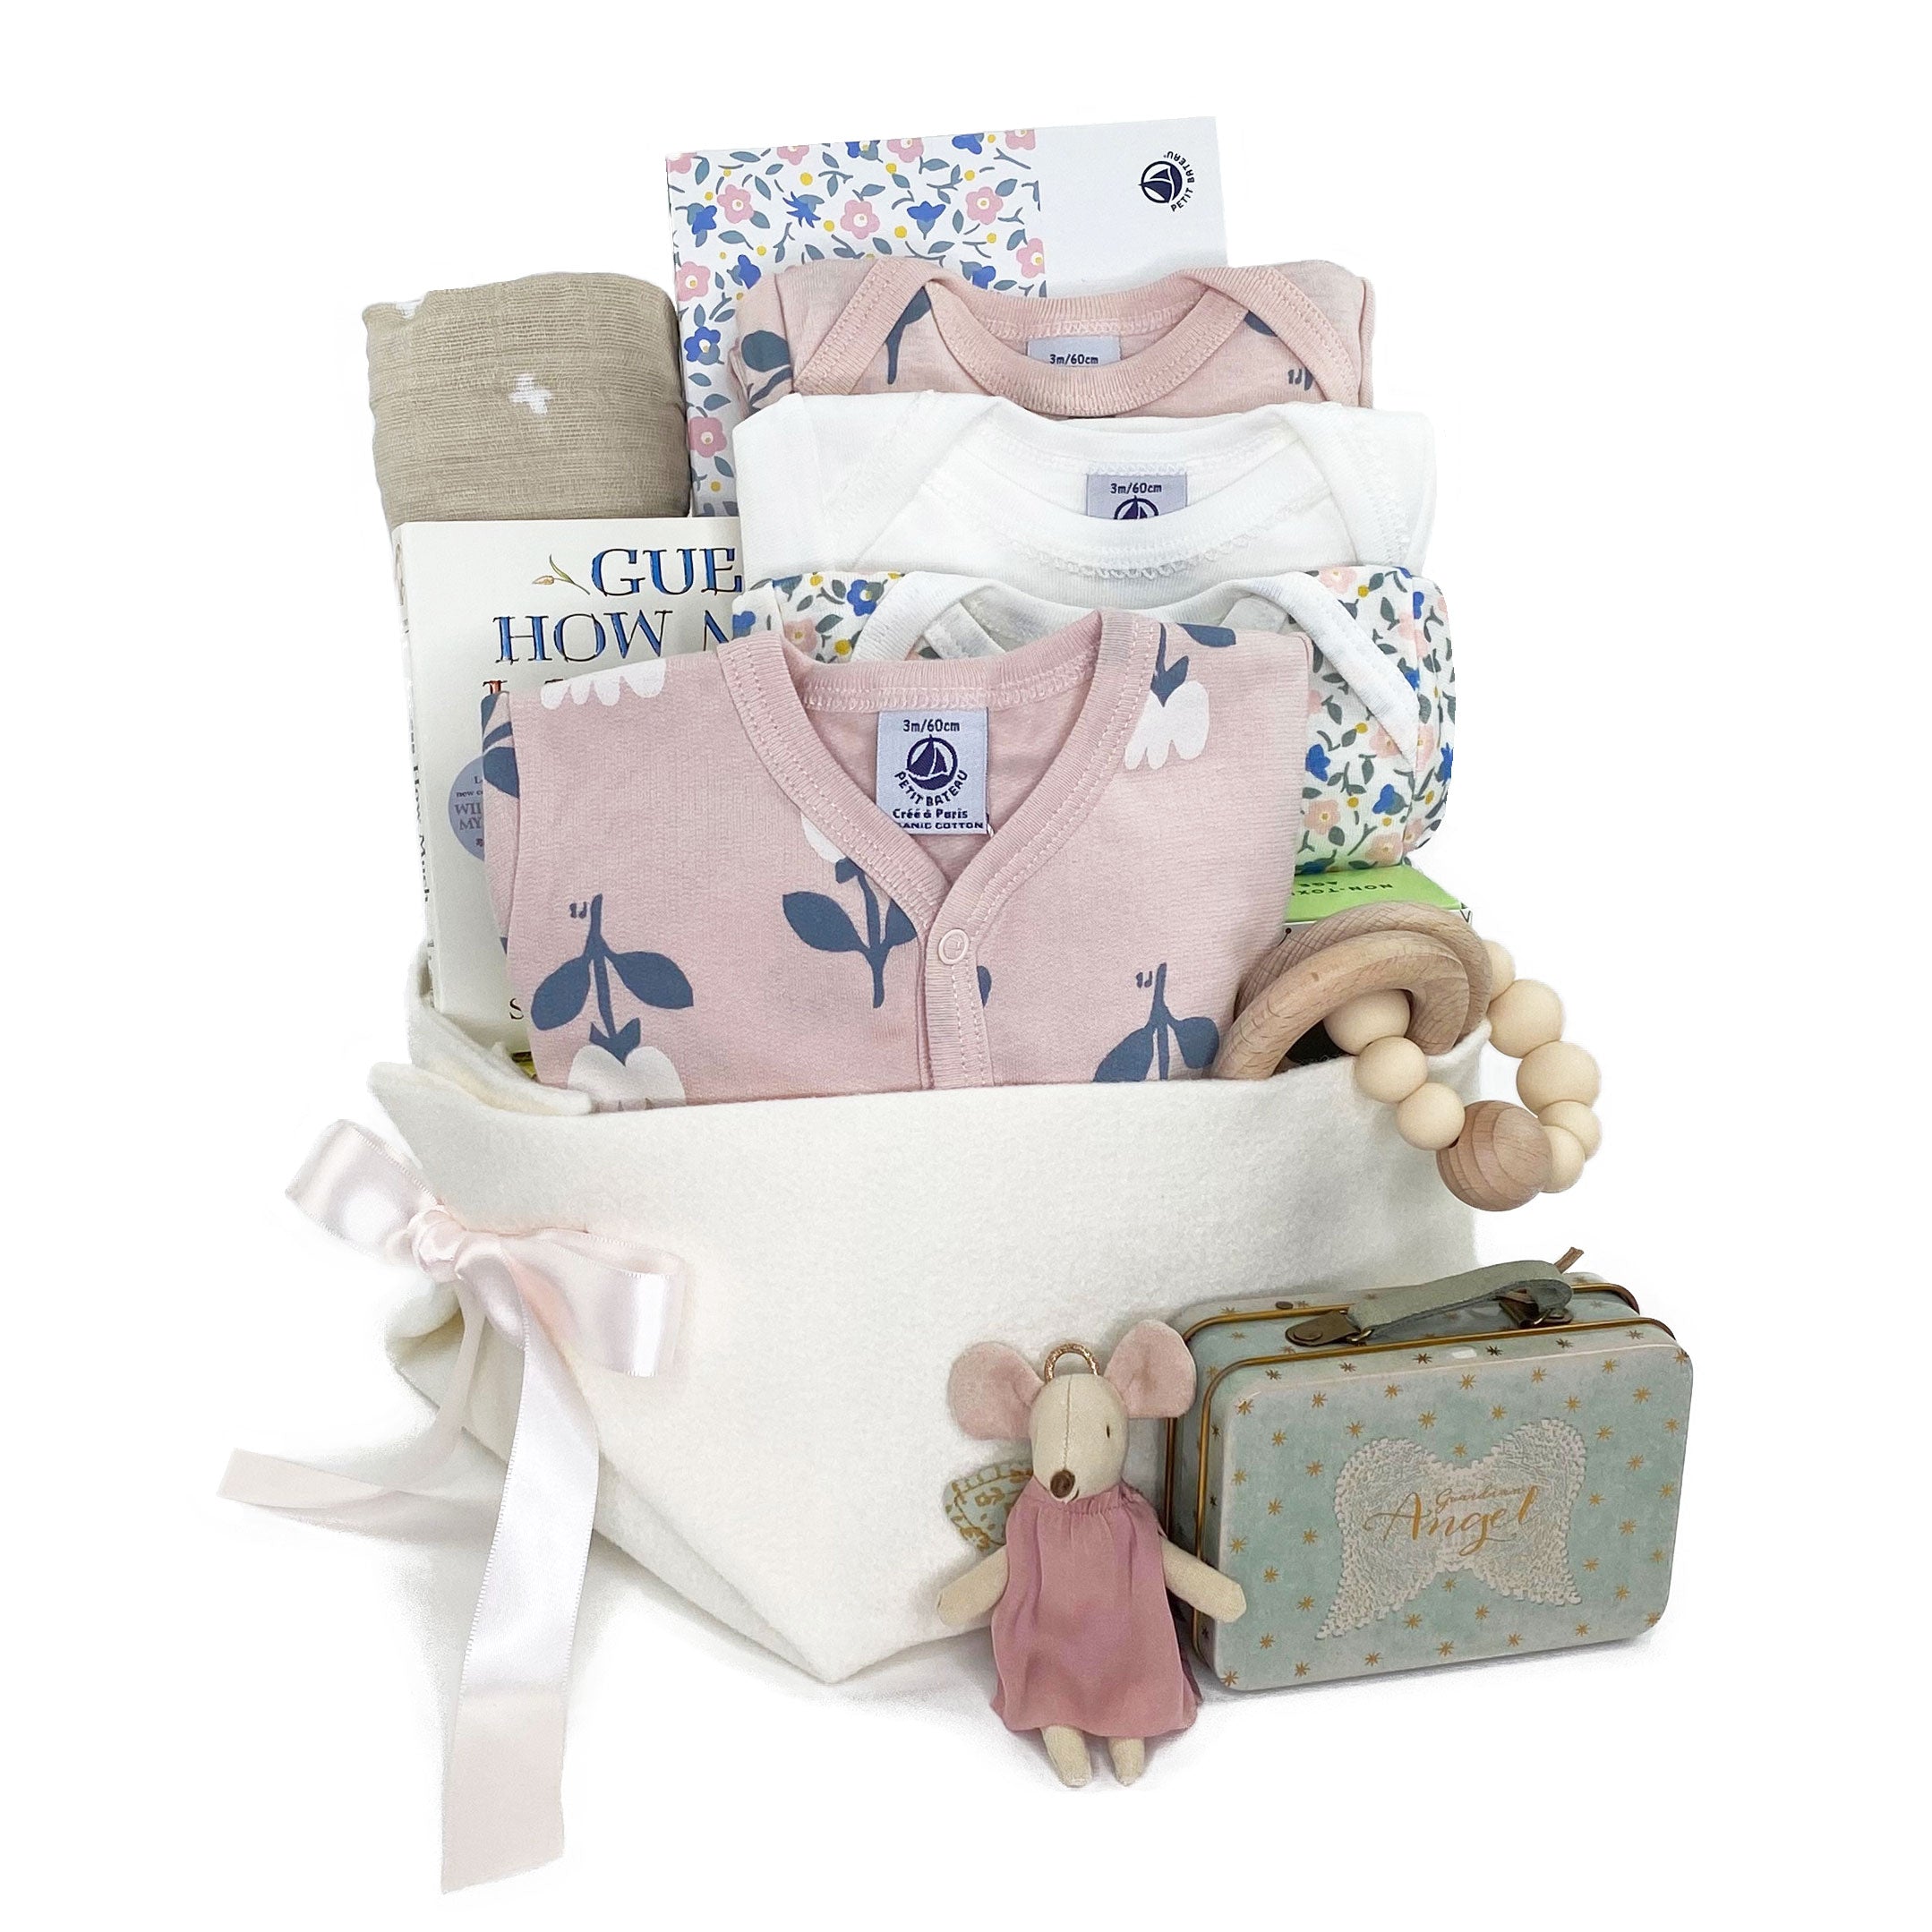 Luxury Baby Gift Basket featuring Petit Bateau Tulips Sleeper and set of 5 onesies in Organic Cotton at Bonjour Baby Baskets